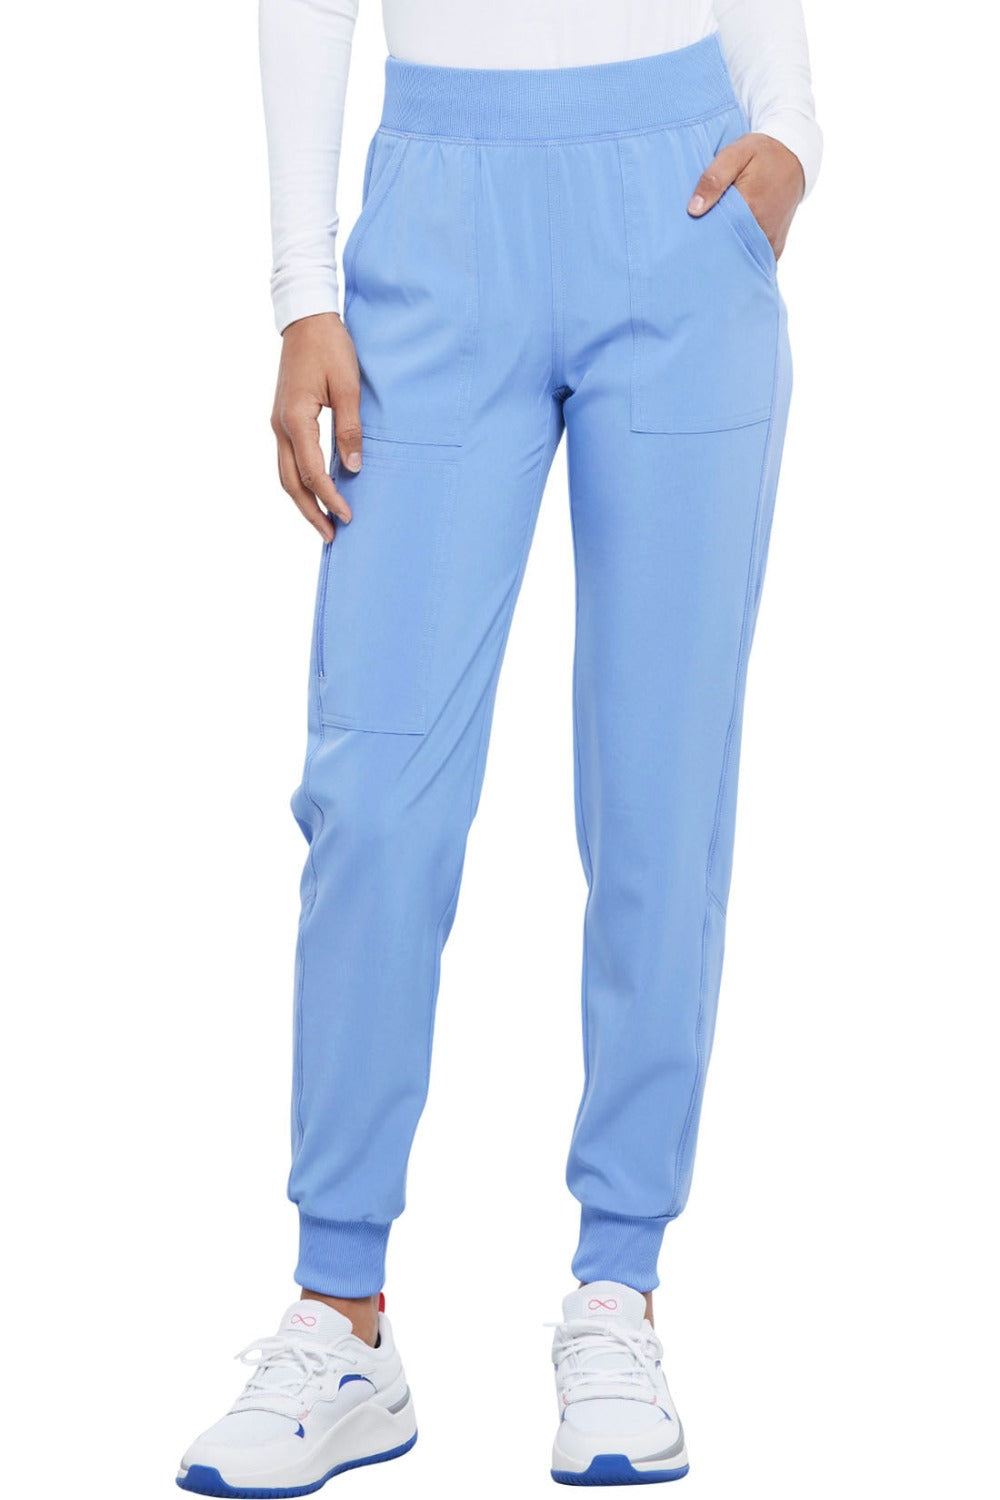 Cherokee Allura Petite Scrub Pant Pull On Jogger in Ciel at Parker's Clothing and Shoes.